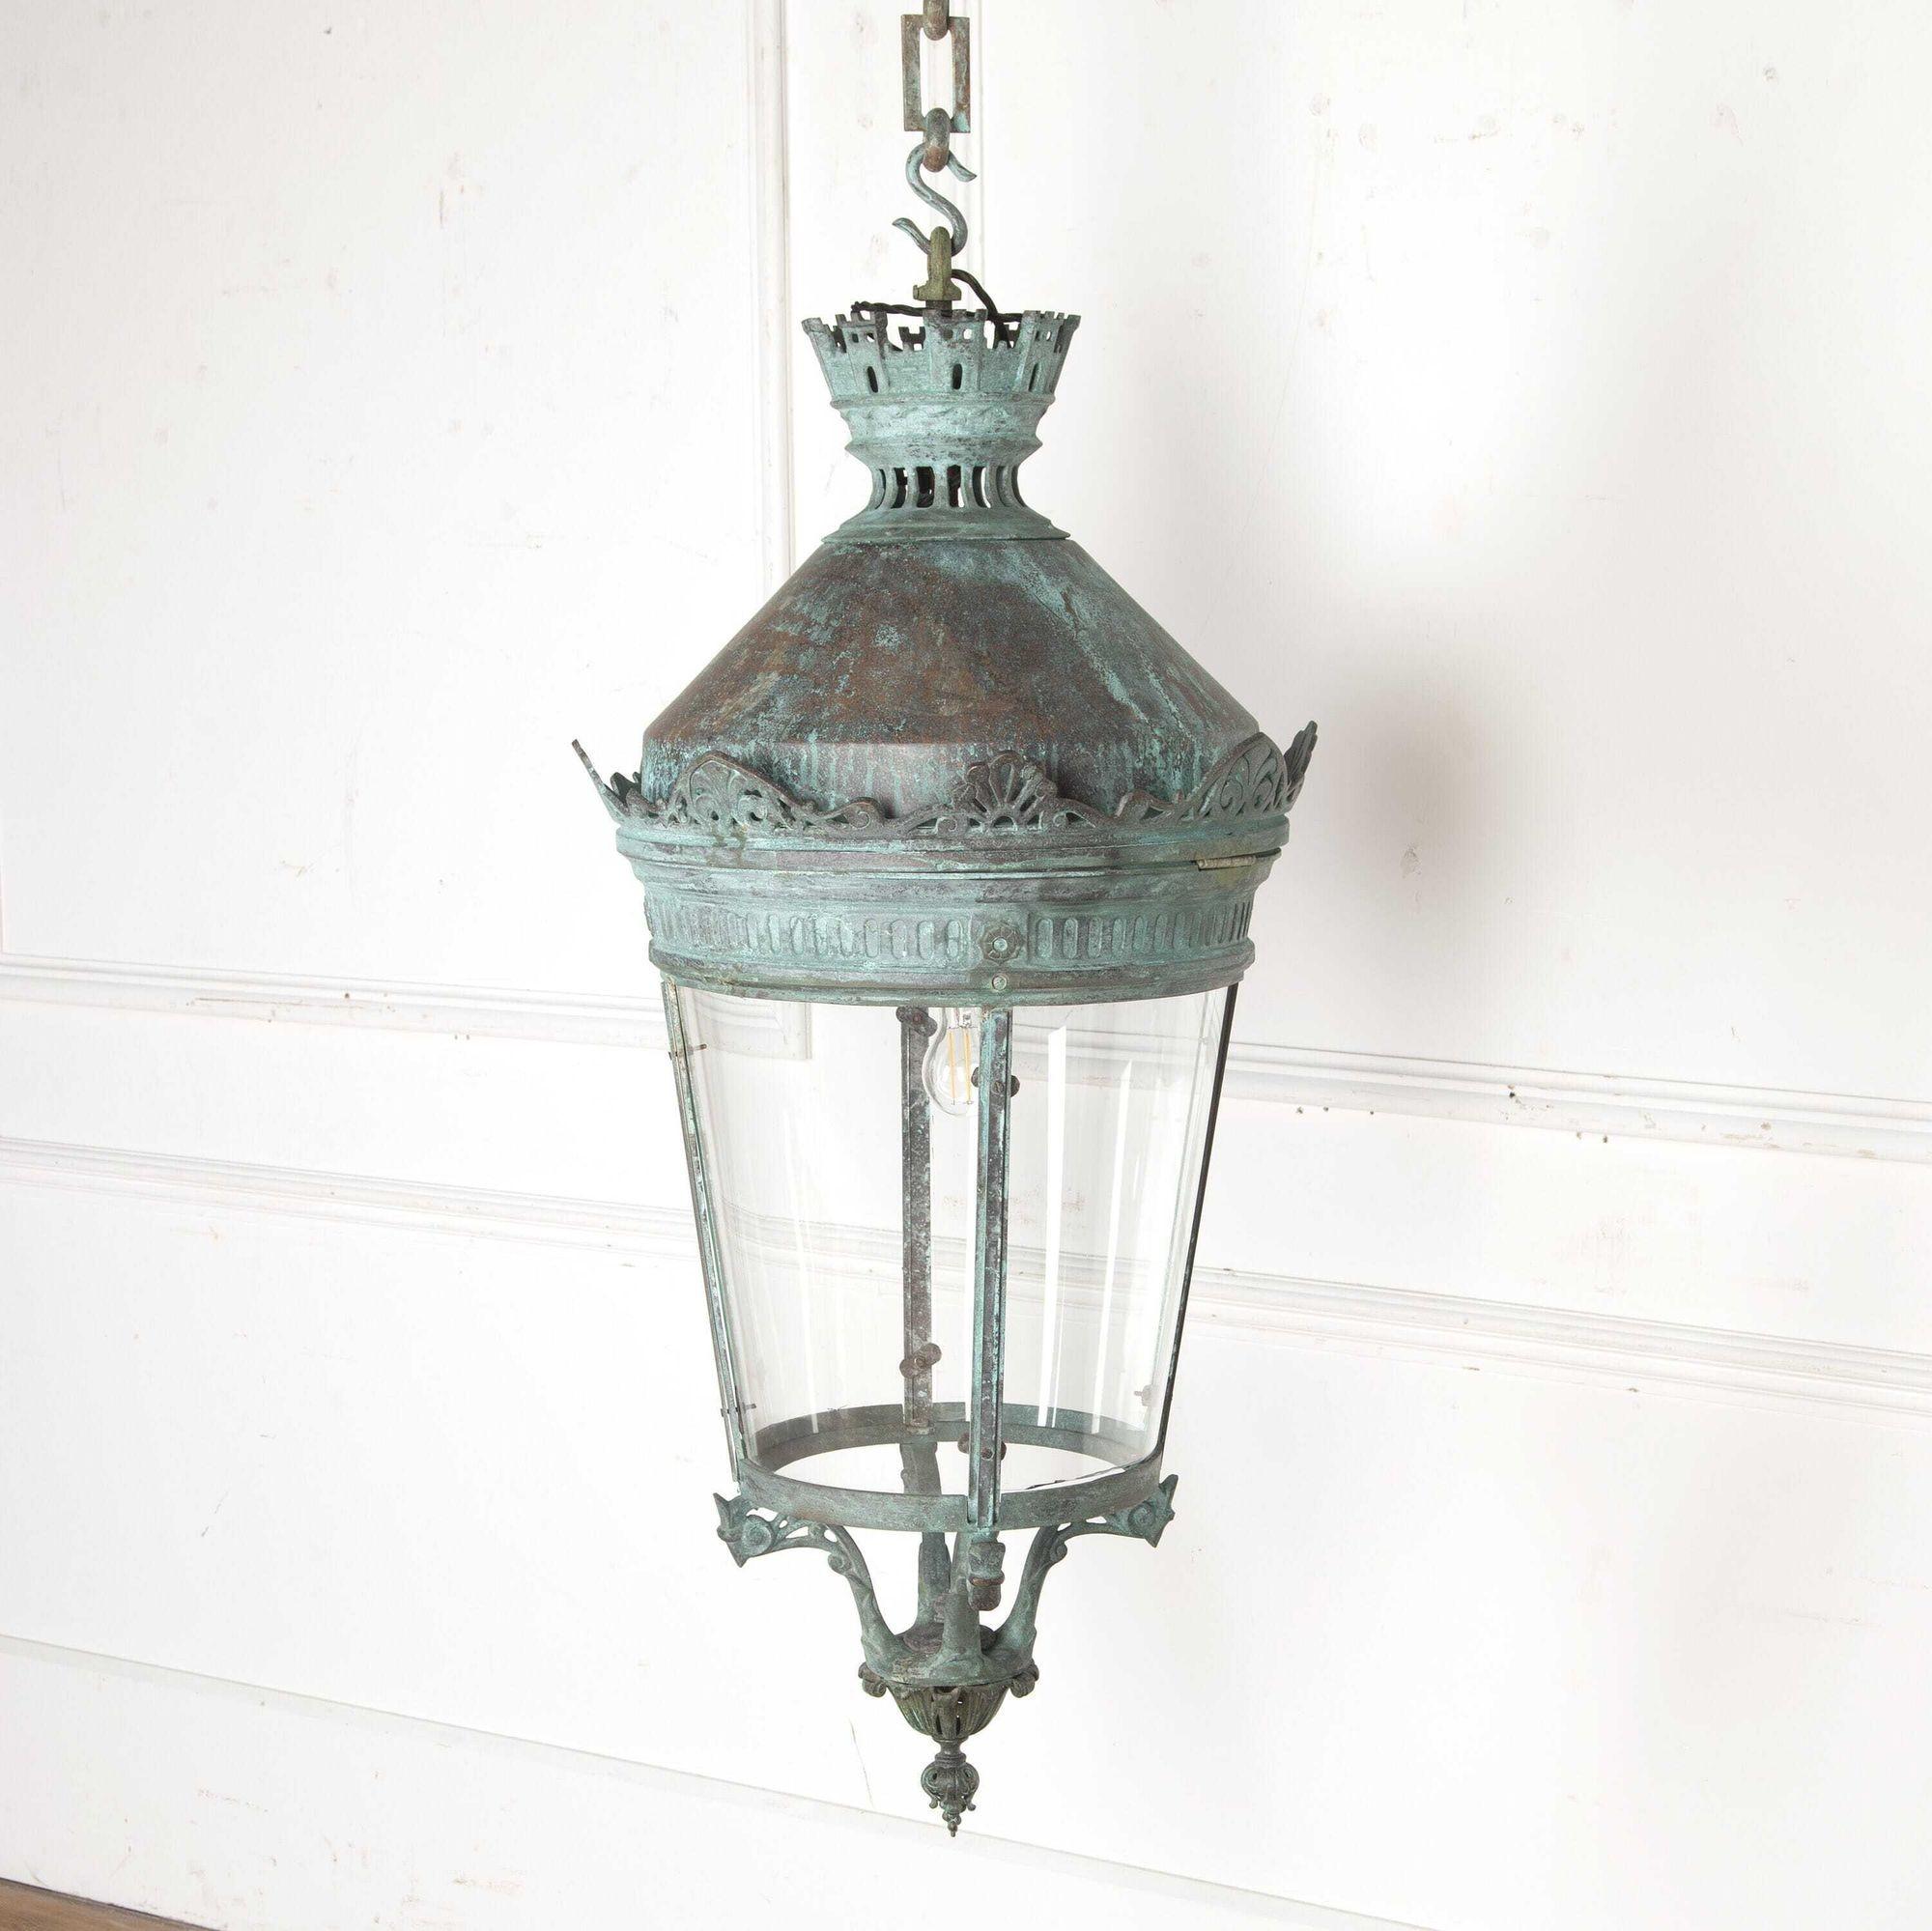 Fantastic 19th century French verdigris copper hanging lantern with chain.
This is a fabulous 19th century French fully glazed convex verdigris lantern, that features a hanging hook above a beautiful-pierced frame with a chain 74 cm. The decorative